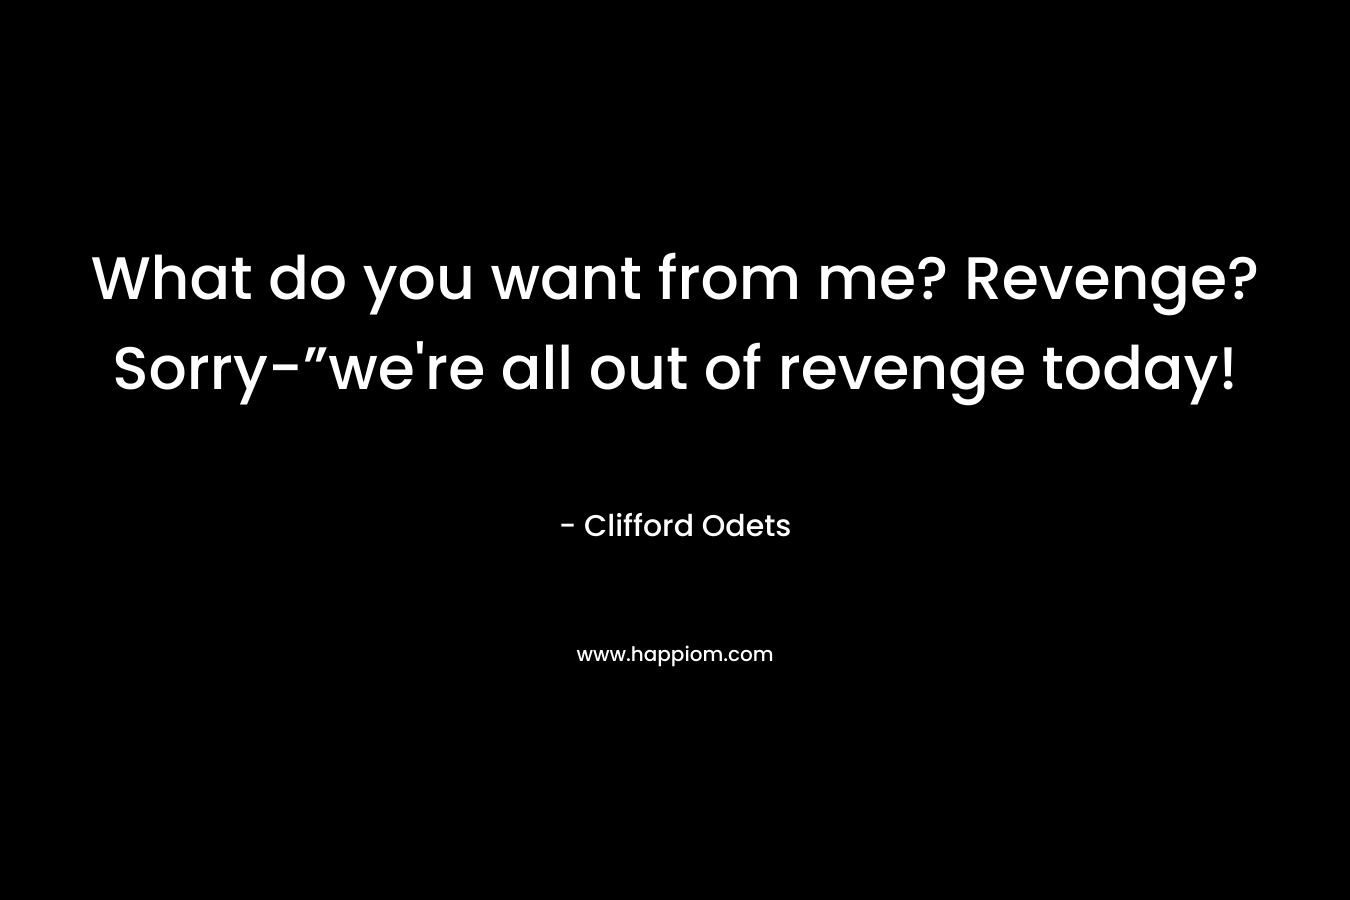 What do you want from me? Revenge? Sorry-”we're all out of revenge today!